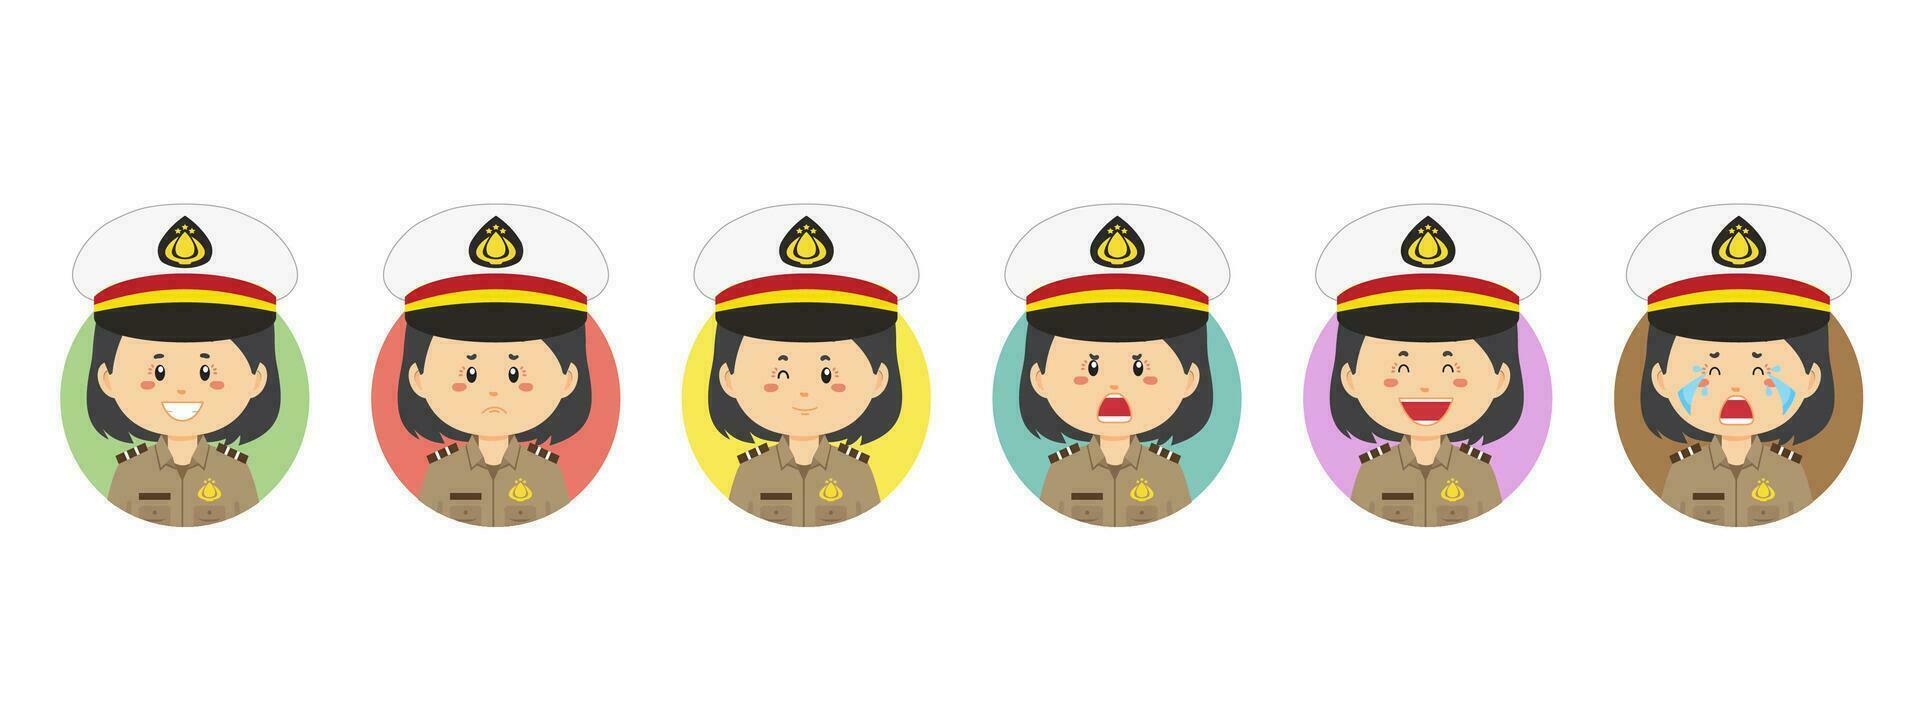 Indonesian Police Avatar with Various Expression vector